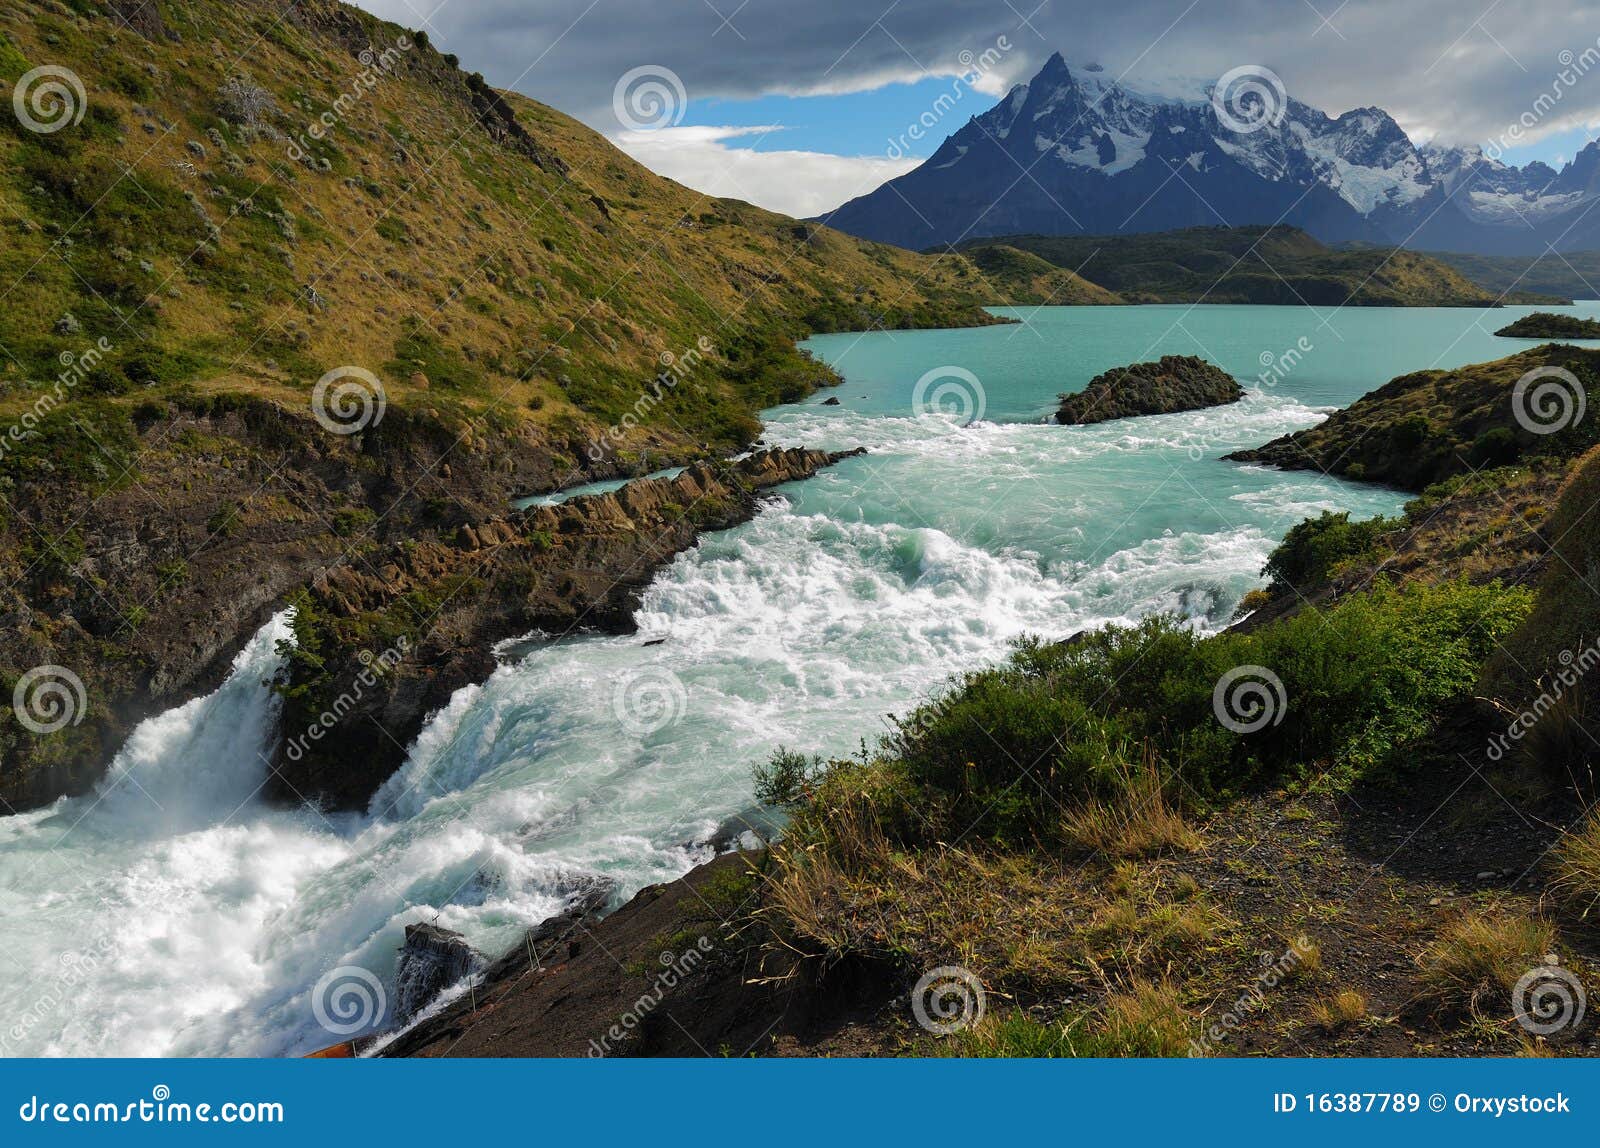 waterfall in the torres del paine